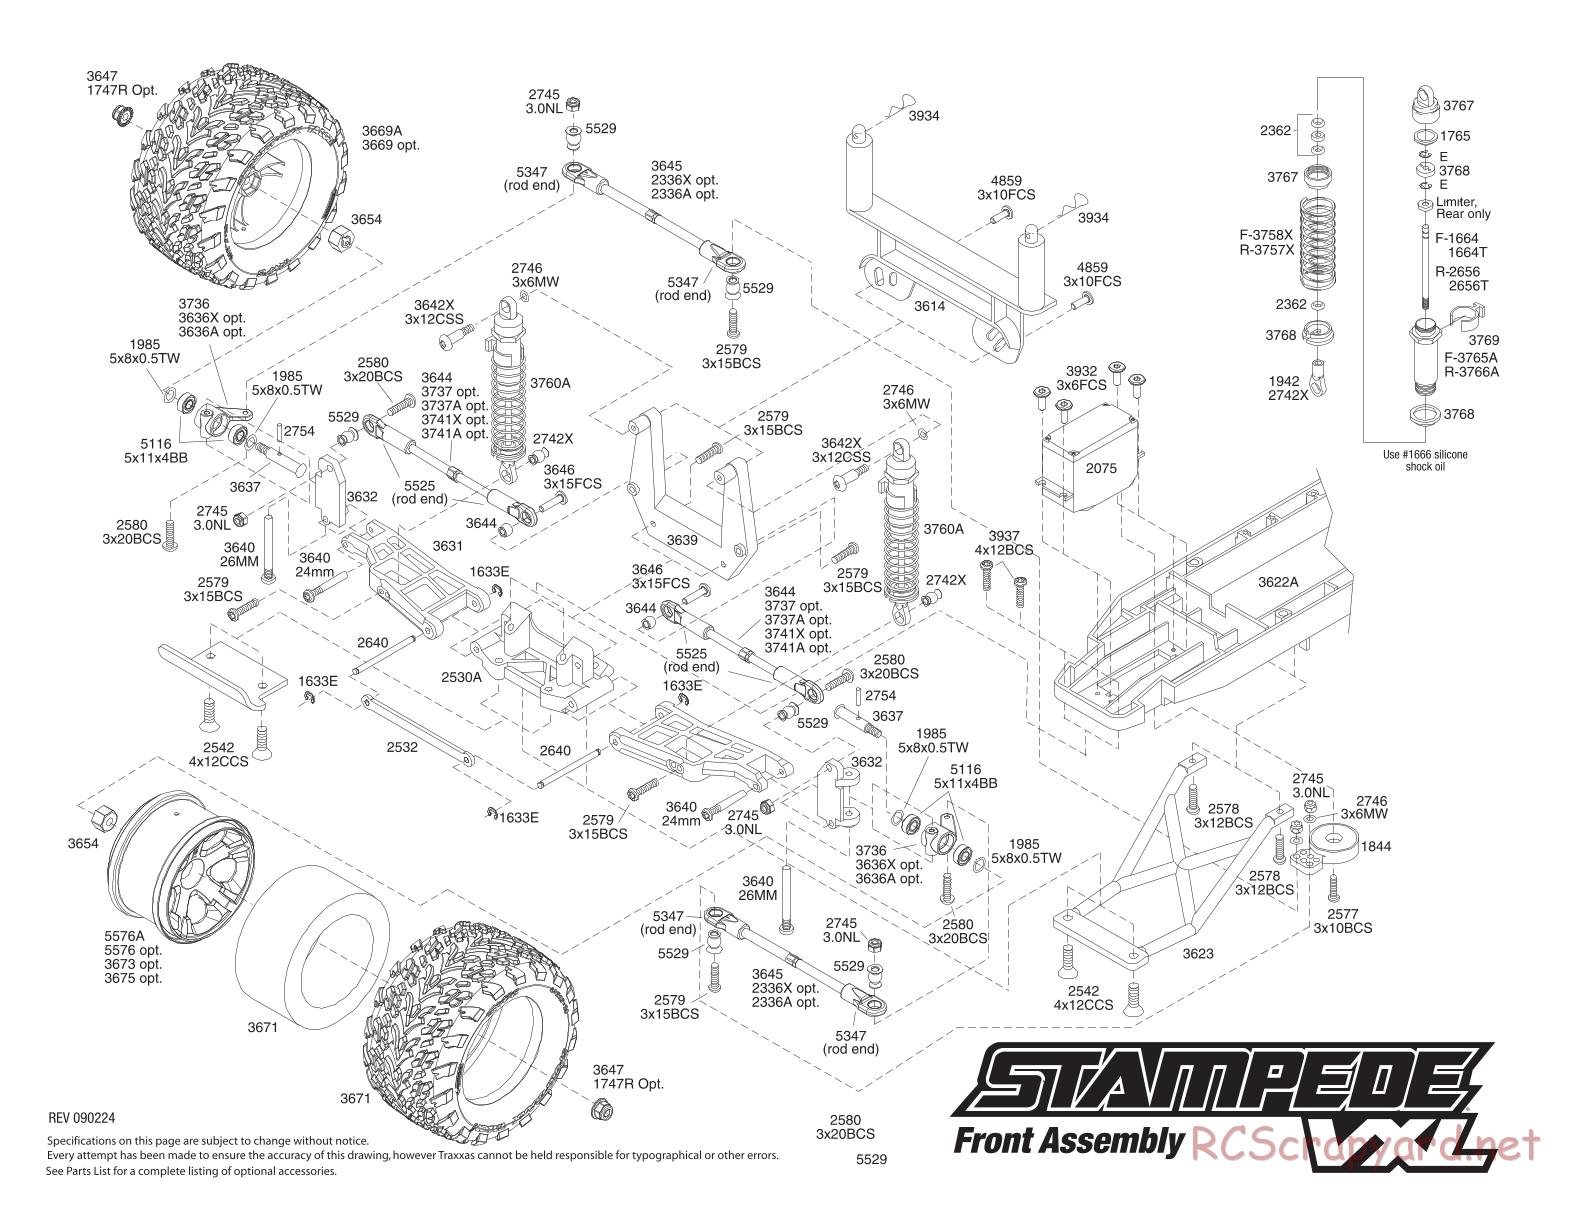 Traxxas - Stampede VXL - Exploded Views - Page 2